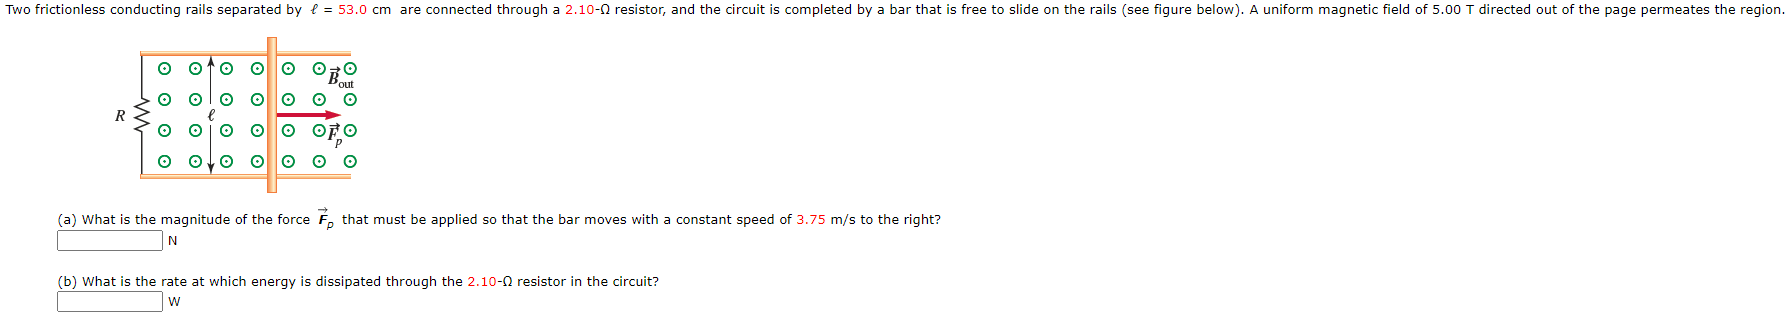 (a) What is the magnitude of the force F,
that must be applied so that the bar moves with a constant speed of 3.75 m/s to the right?
N
(b) What is the rate at which energy is dissipated through the 2.10-0 resistor in the circuit?
